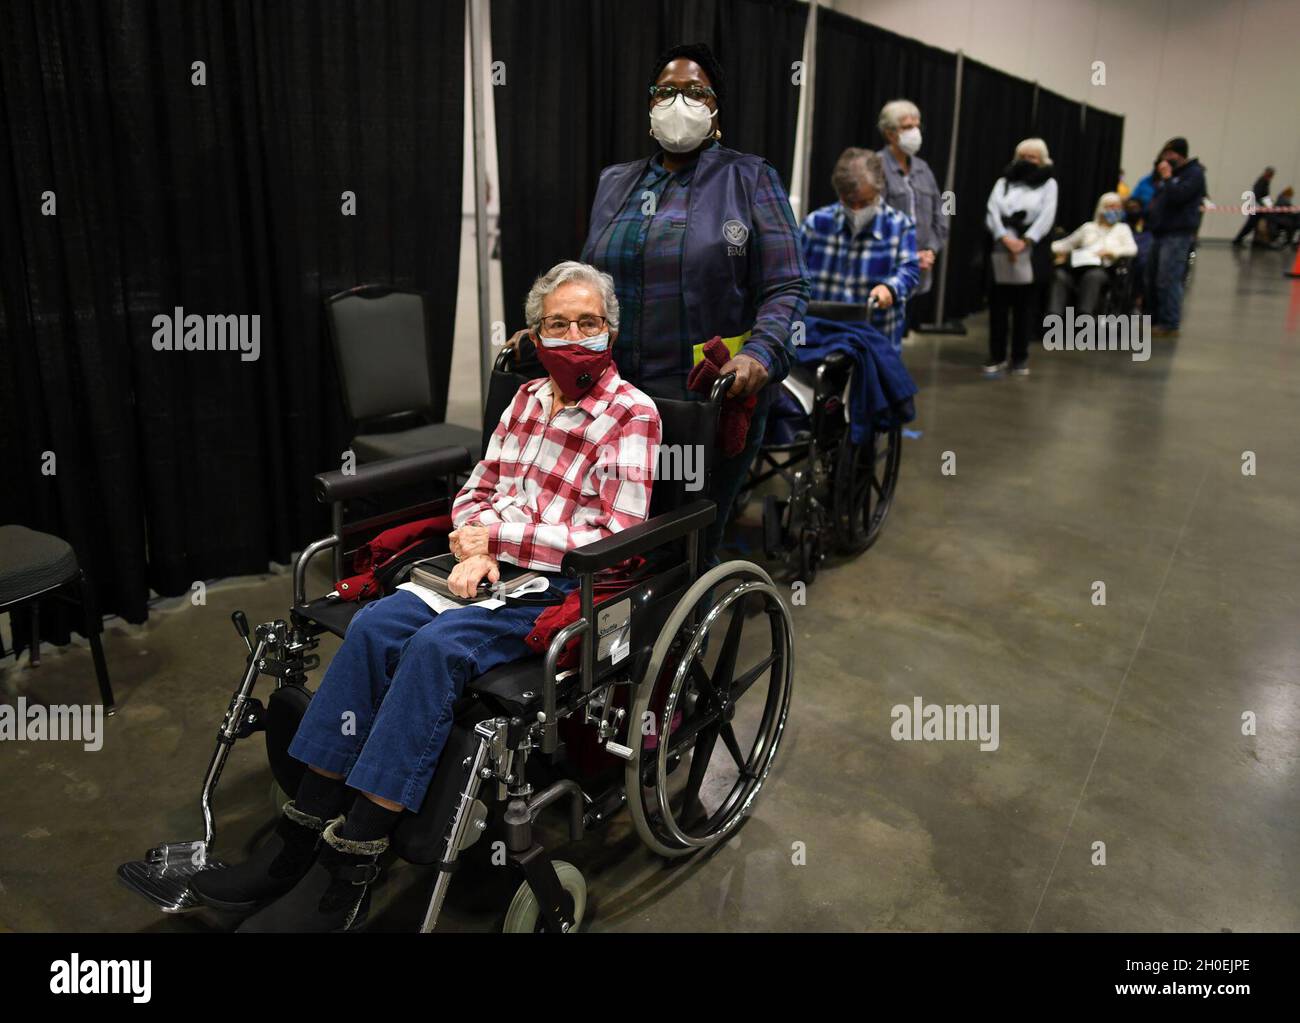 Nashville, TN (February 13, 2021) A FEMA staffer assists local resident, Sister Nena De Matteo, at the Music City Convention Center where a Covid vaccination site has been set up by the state and local officials. Stock Photo